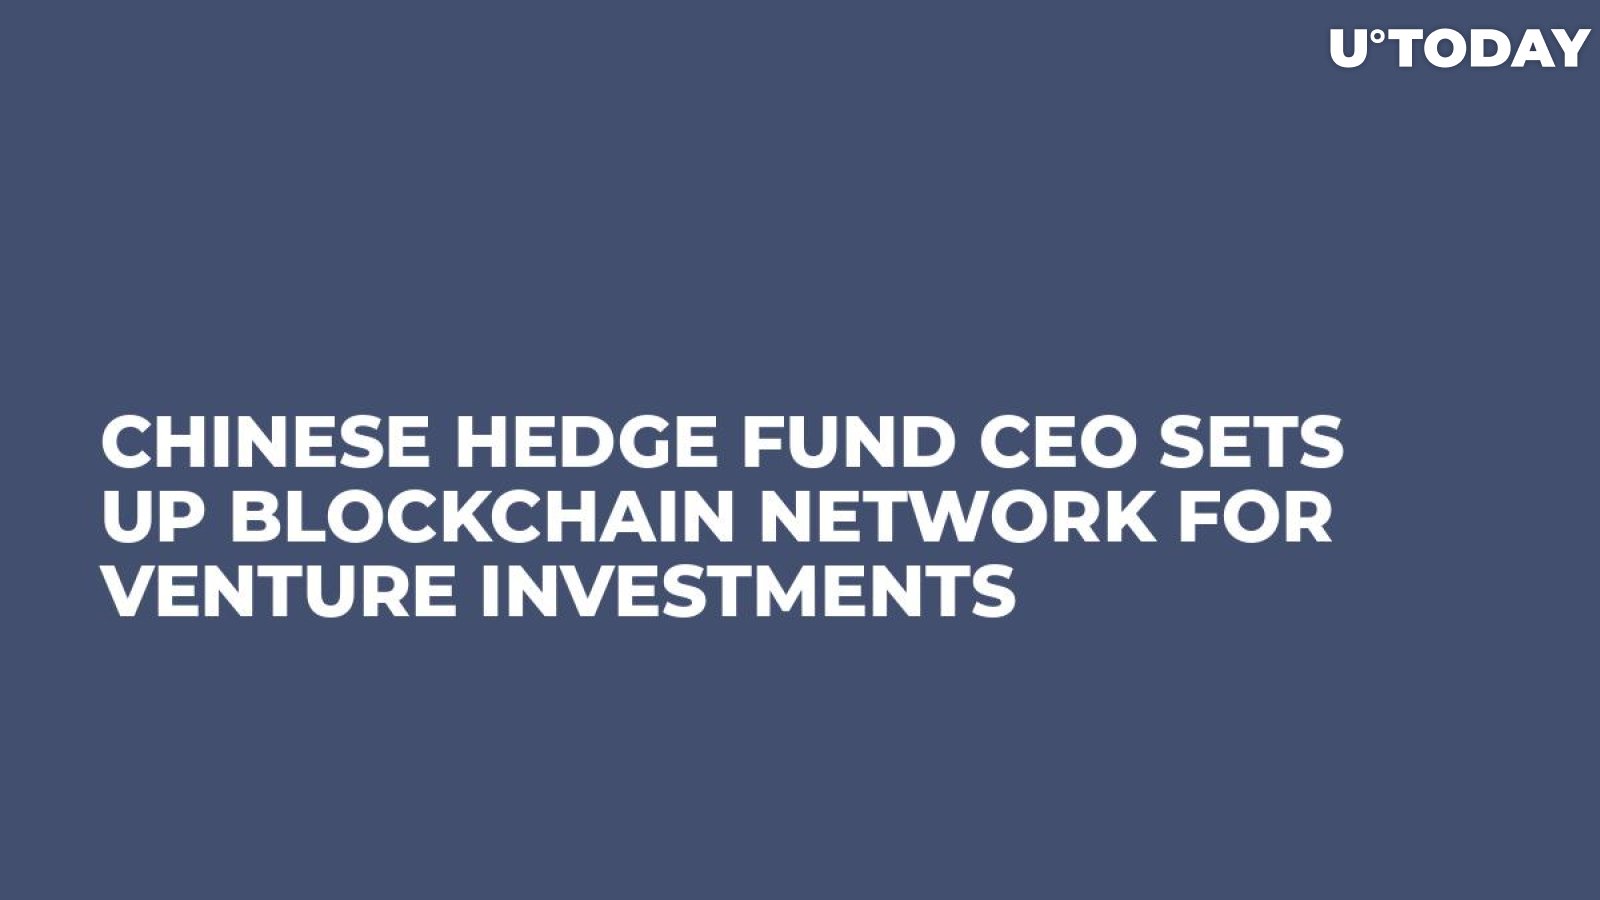 Chinese Hedge Fund CEO Sets Up Blockchain Network for Venture Investments